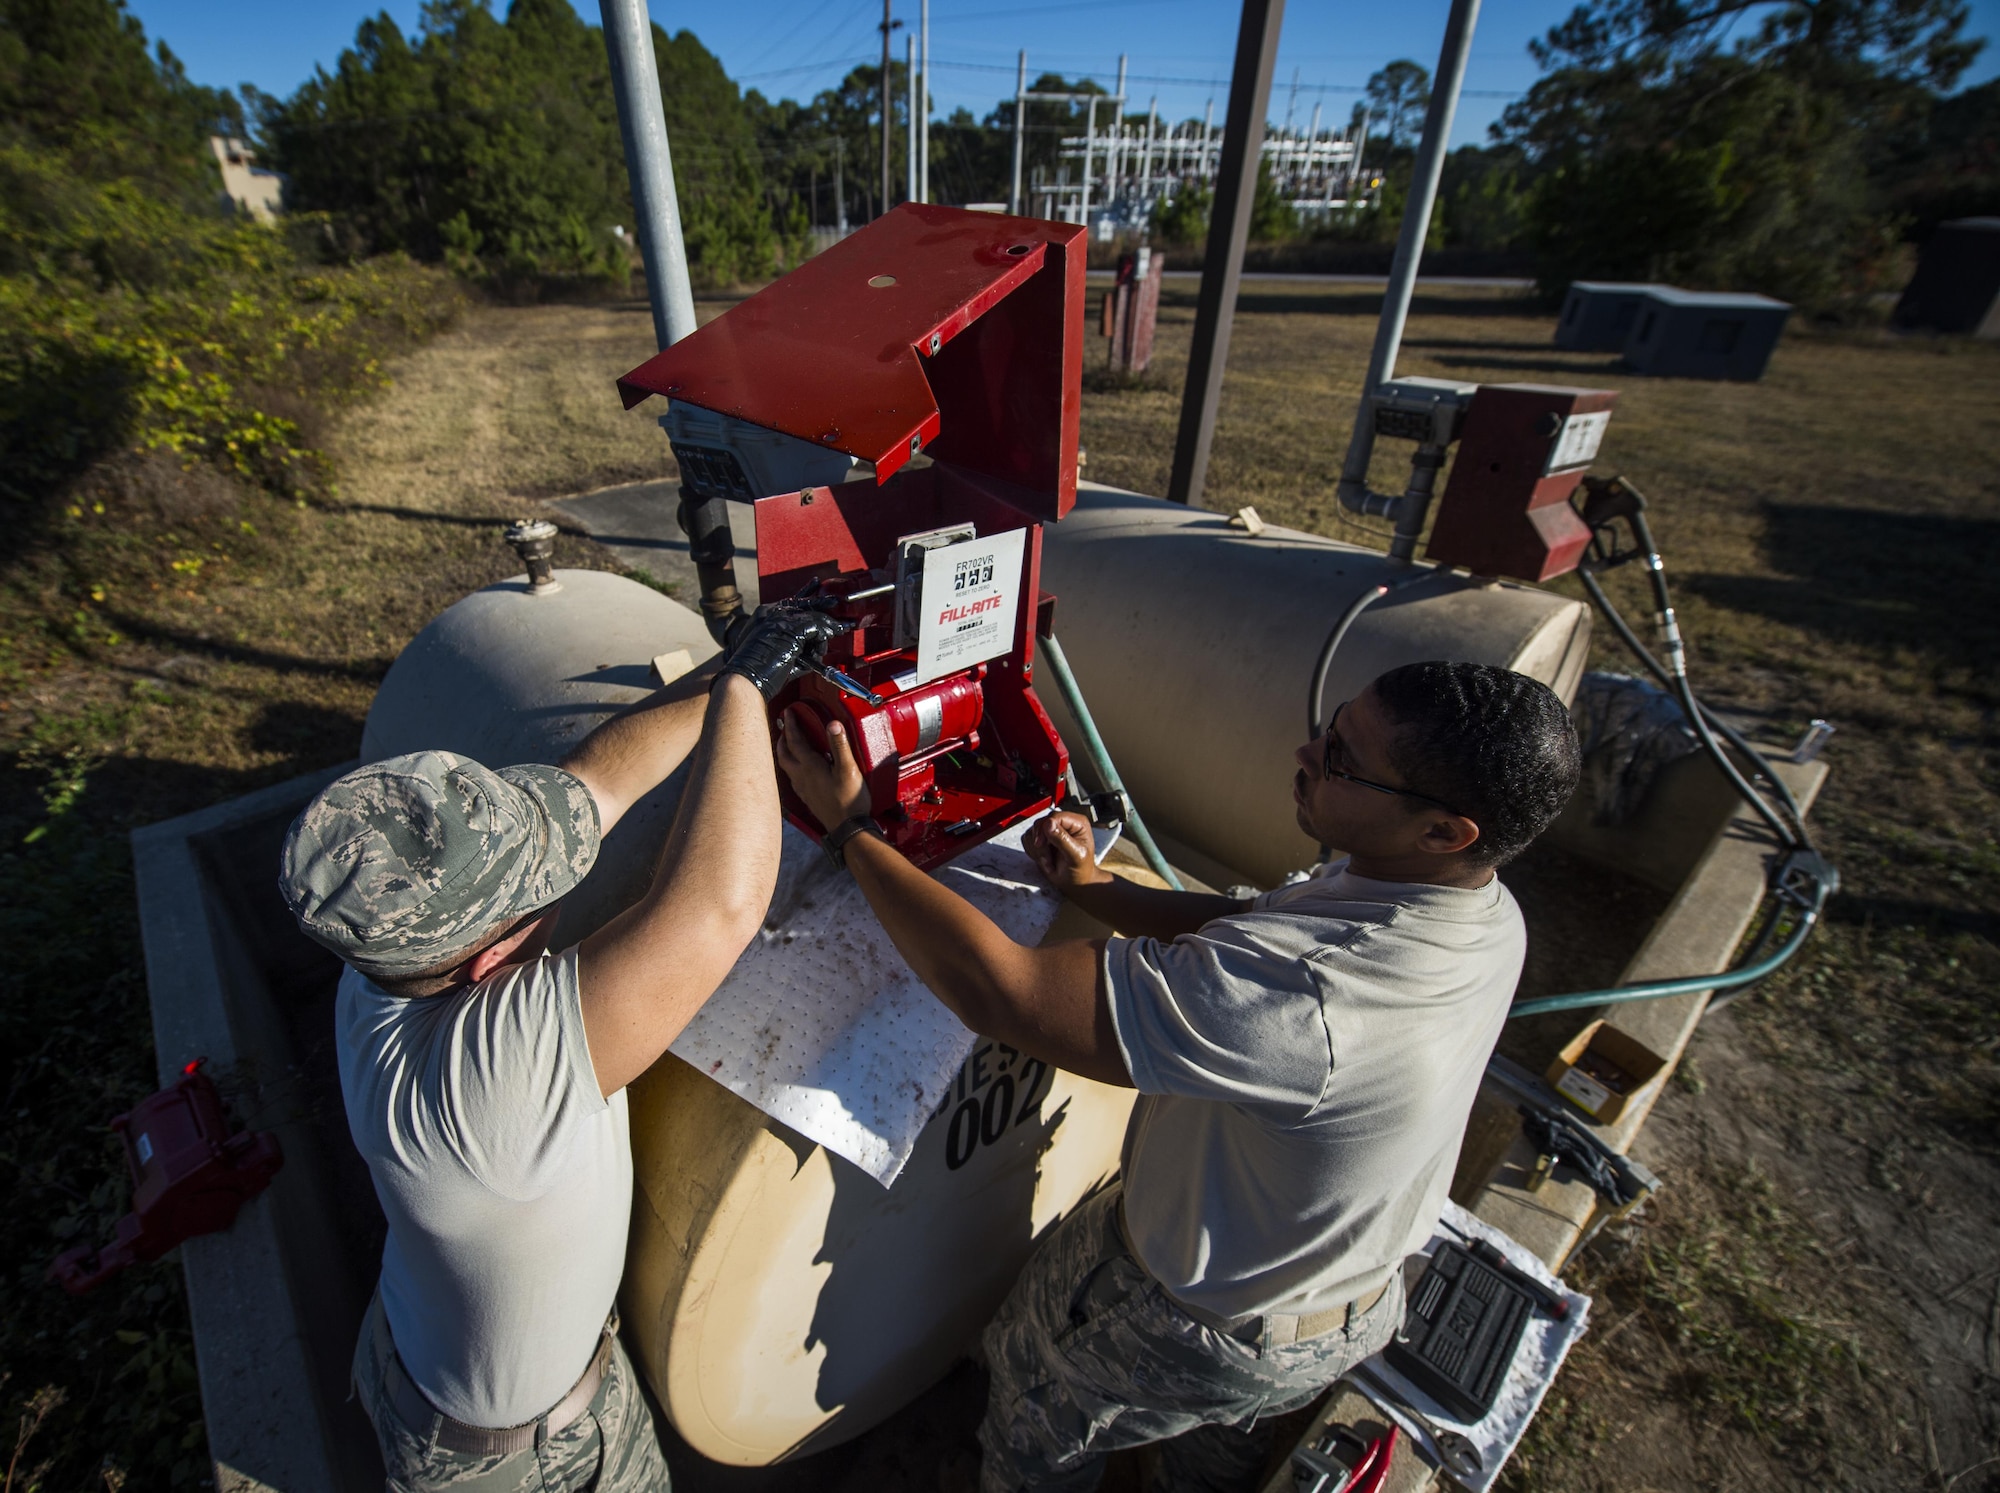 Senior Airmen Dacota Napolitano, left, and Chris Coney, water and fuels system specialists with the 1st Special Operations Civil Engineer Squadron, remove a fuel pump from a fuel tank at Hurlburt Field, Fla., Nov. 17, 2016. The fuel tanks are used to hold fuel for lawn maintenance equipment that maintain Hurlburt’s Gator Lakes Golf Course. (U.S. Air Force photo by Airman 1st Class Joseph Pick)